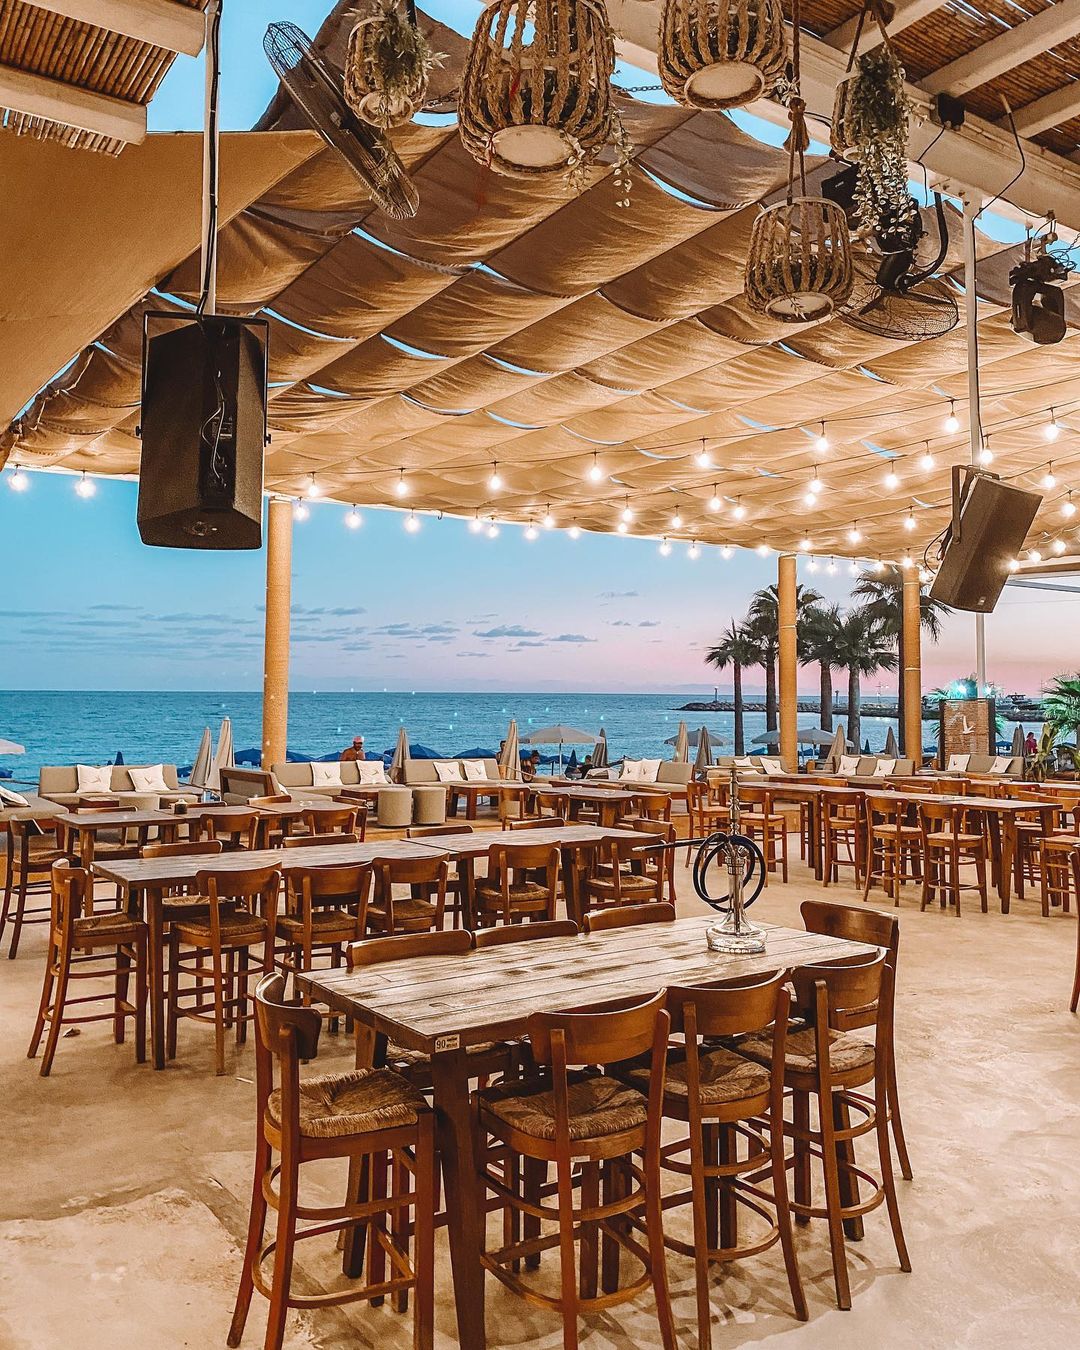 A unique summer experience on the golden sands of Pantachou beach in Ayia Napa - Best Restaurants in Cyprus